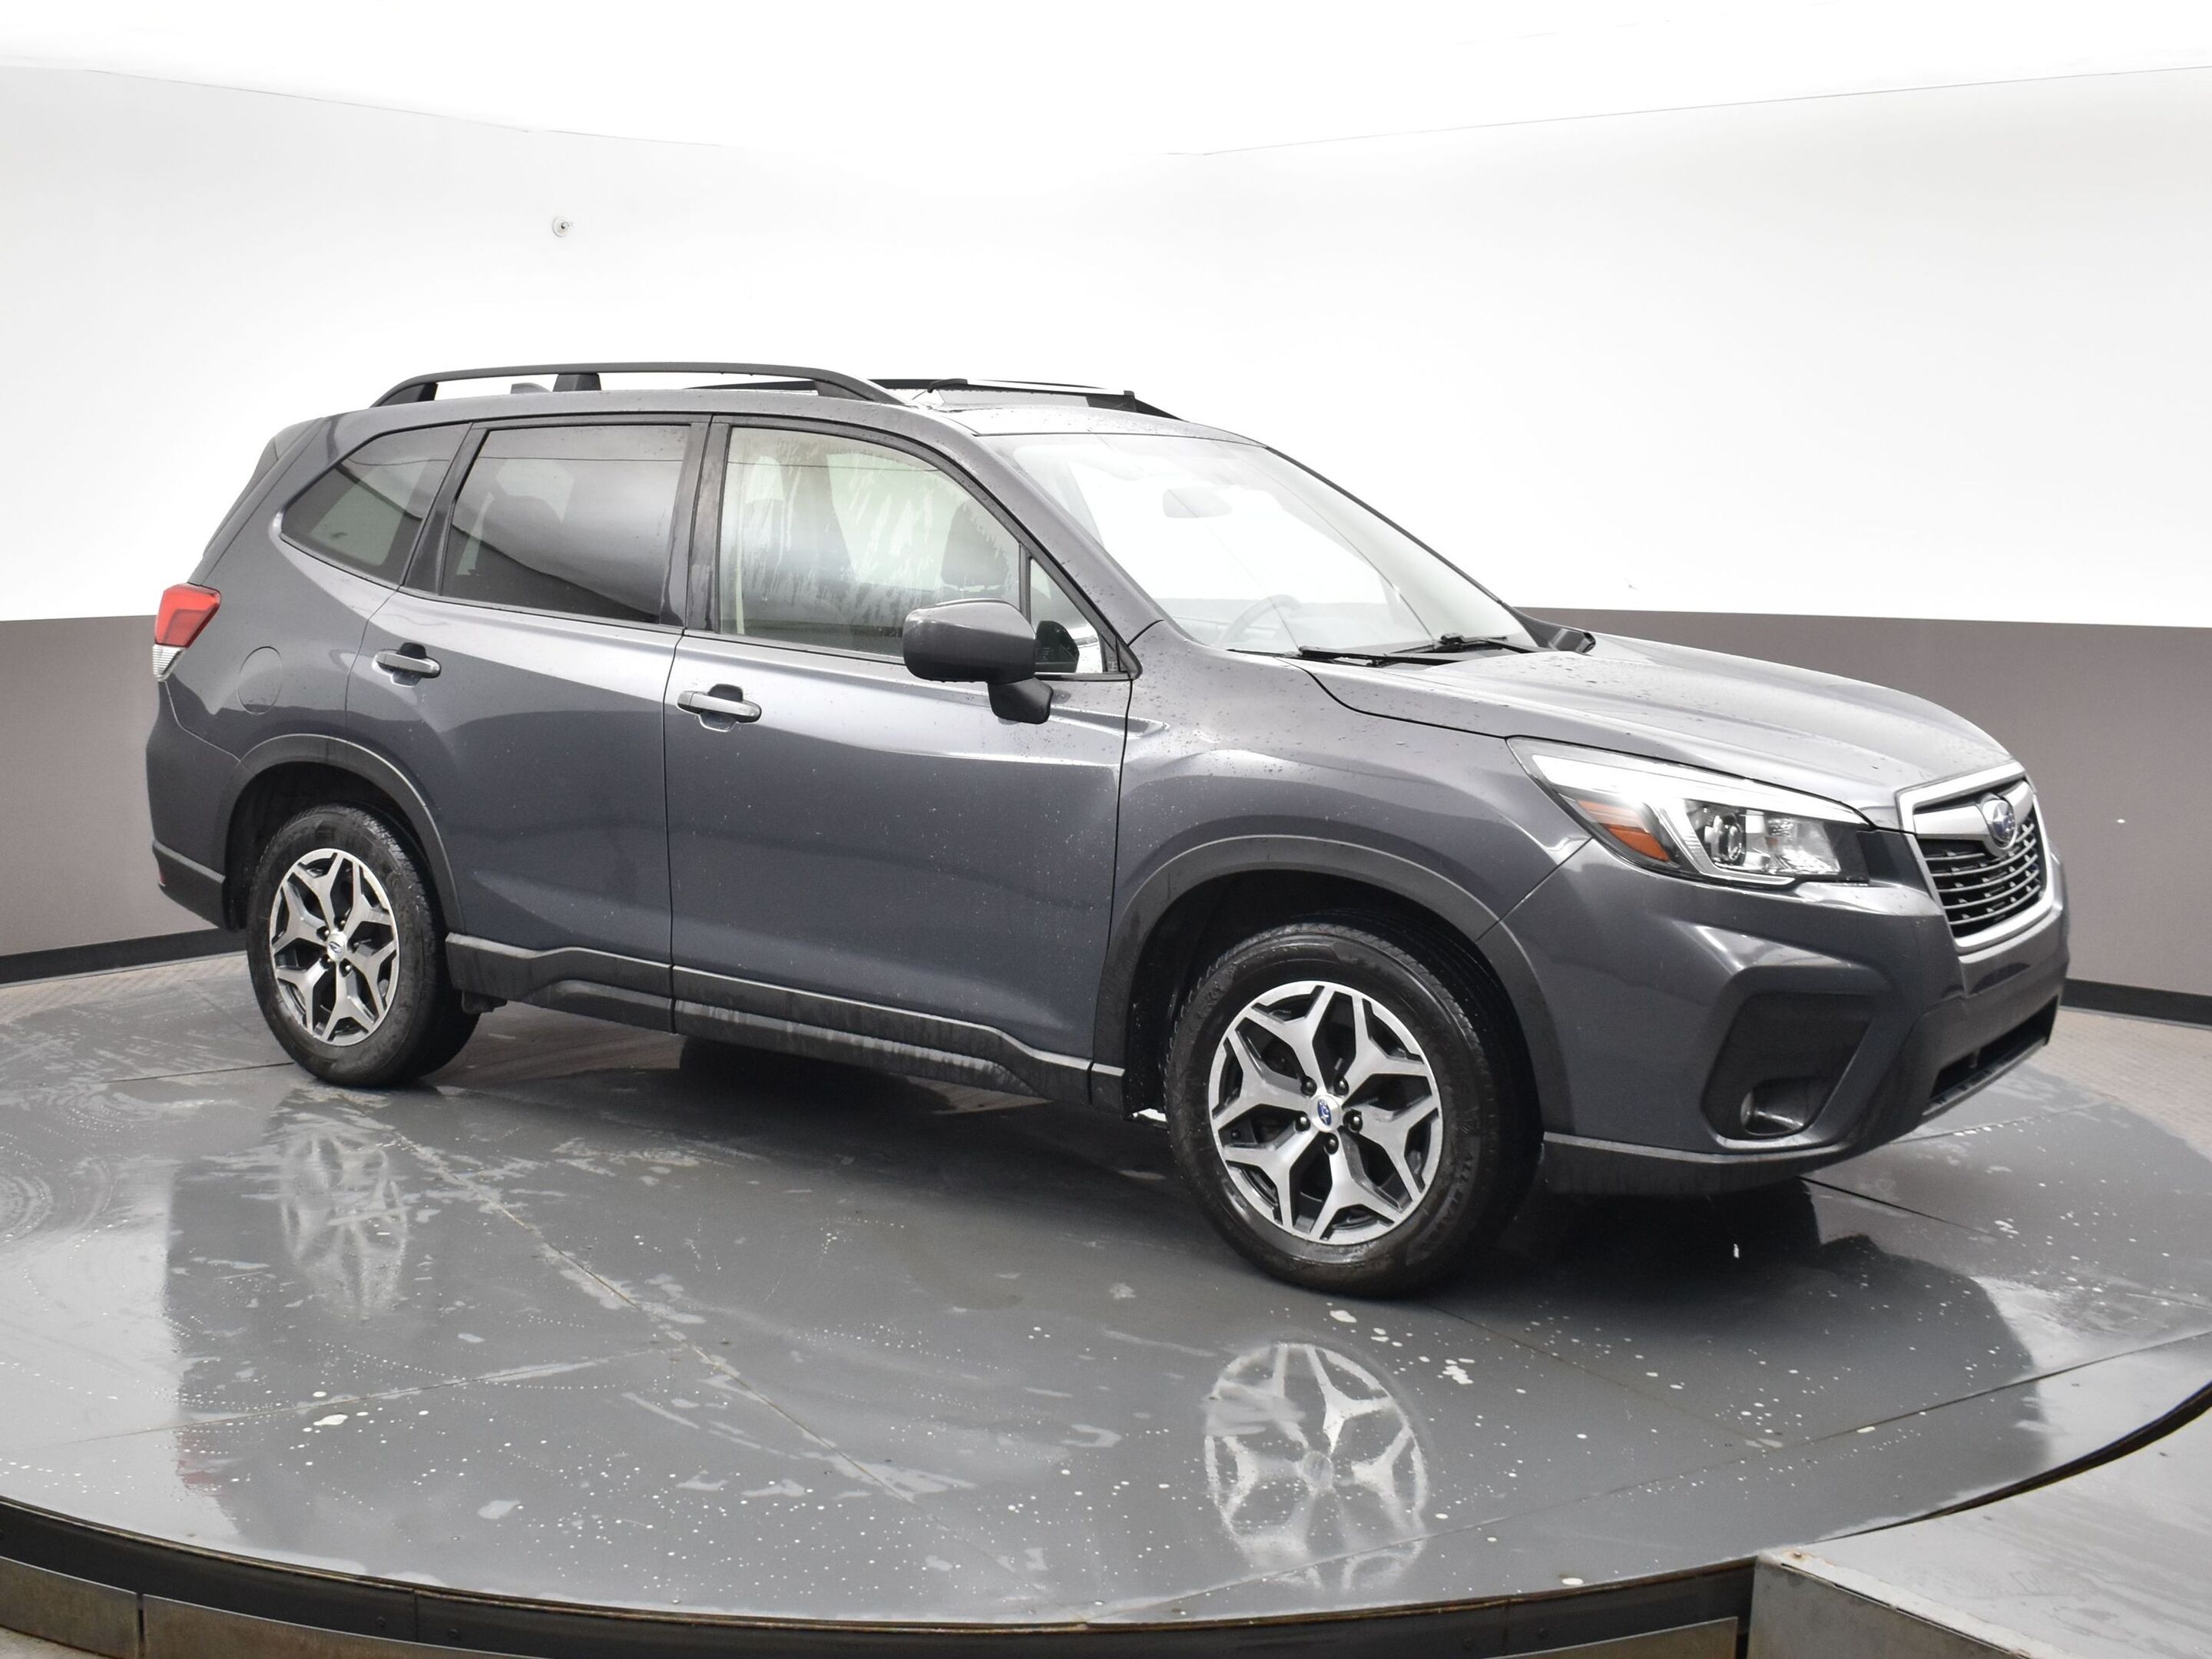 2020 Subaru Forester TOURING AWD W/ MOONROOF, HEATED SEATS, POWER REAR 